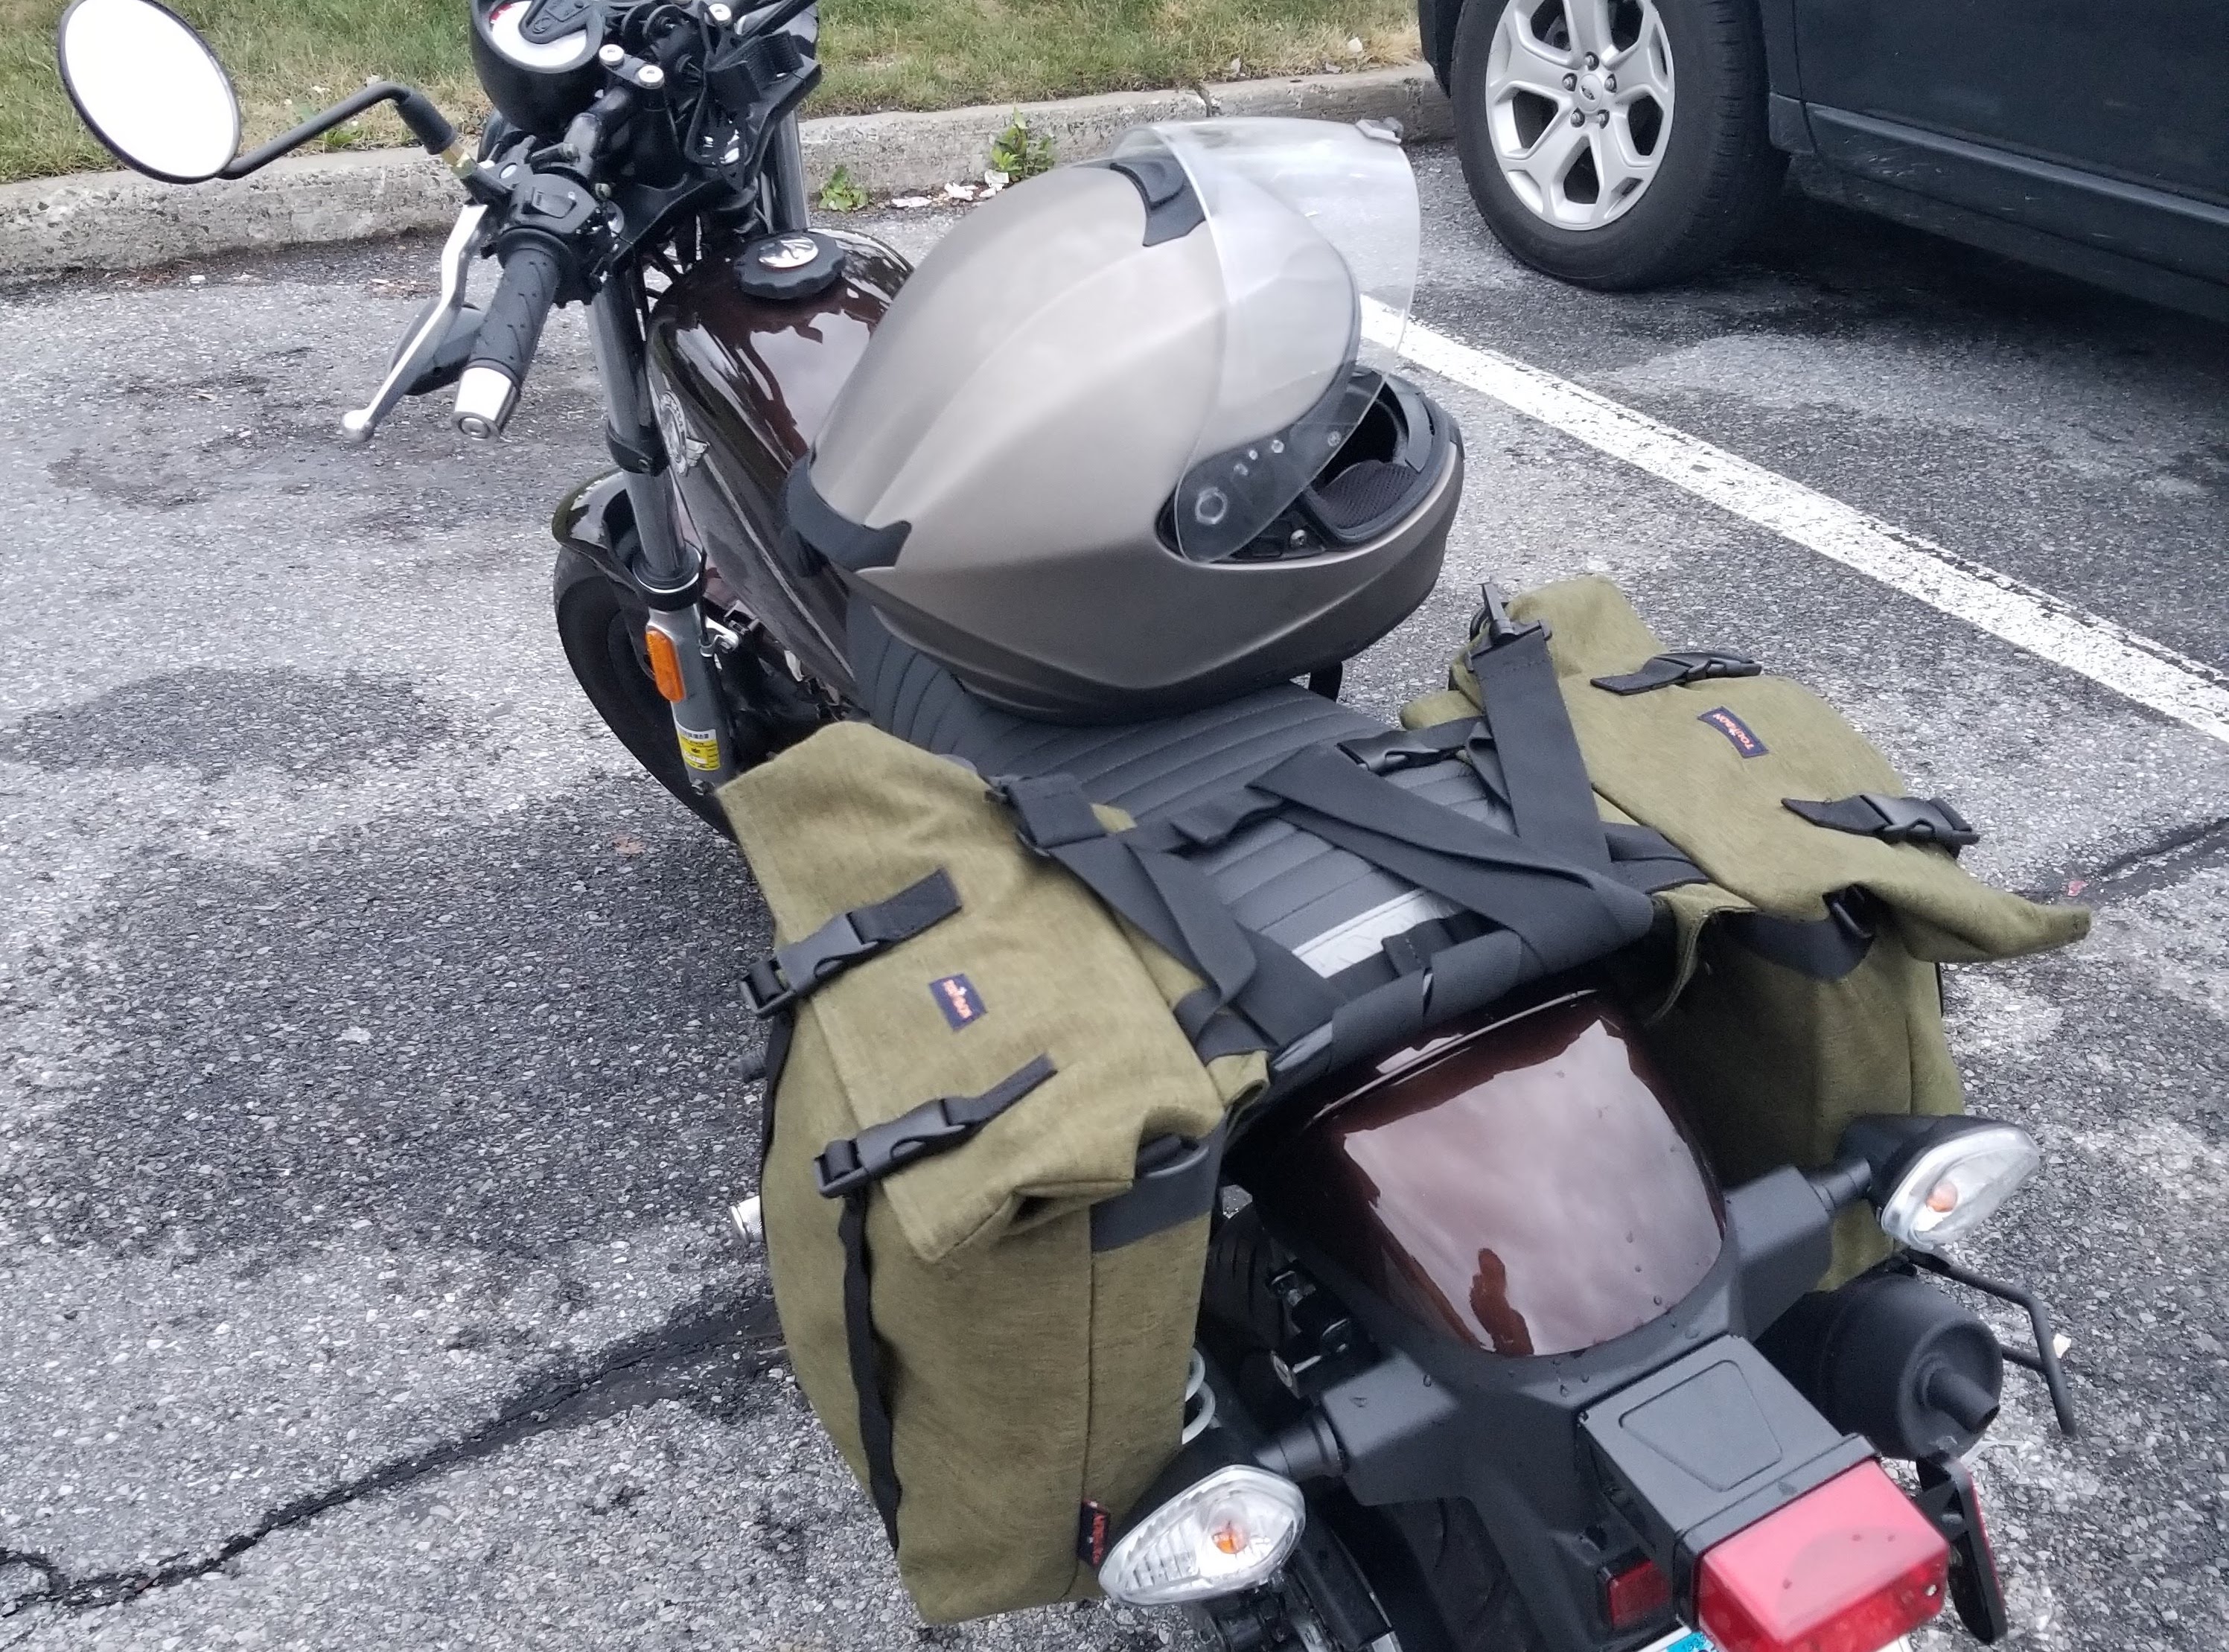 bags strapped to motorcycle